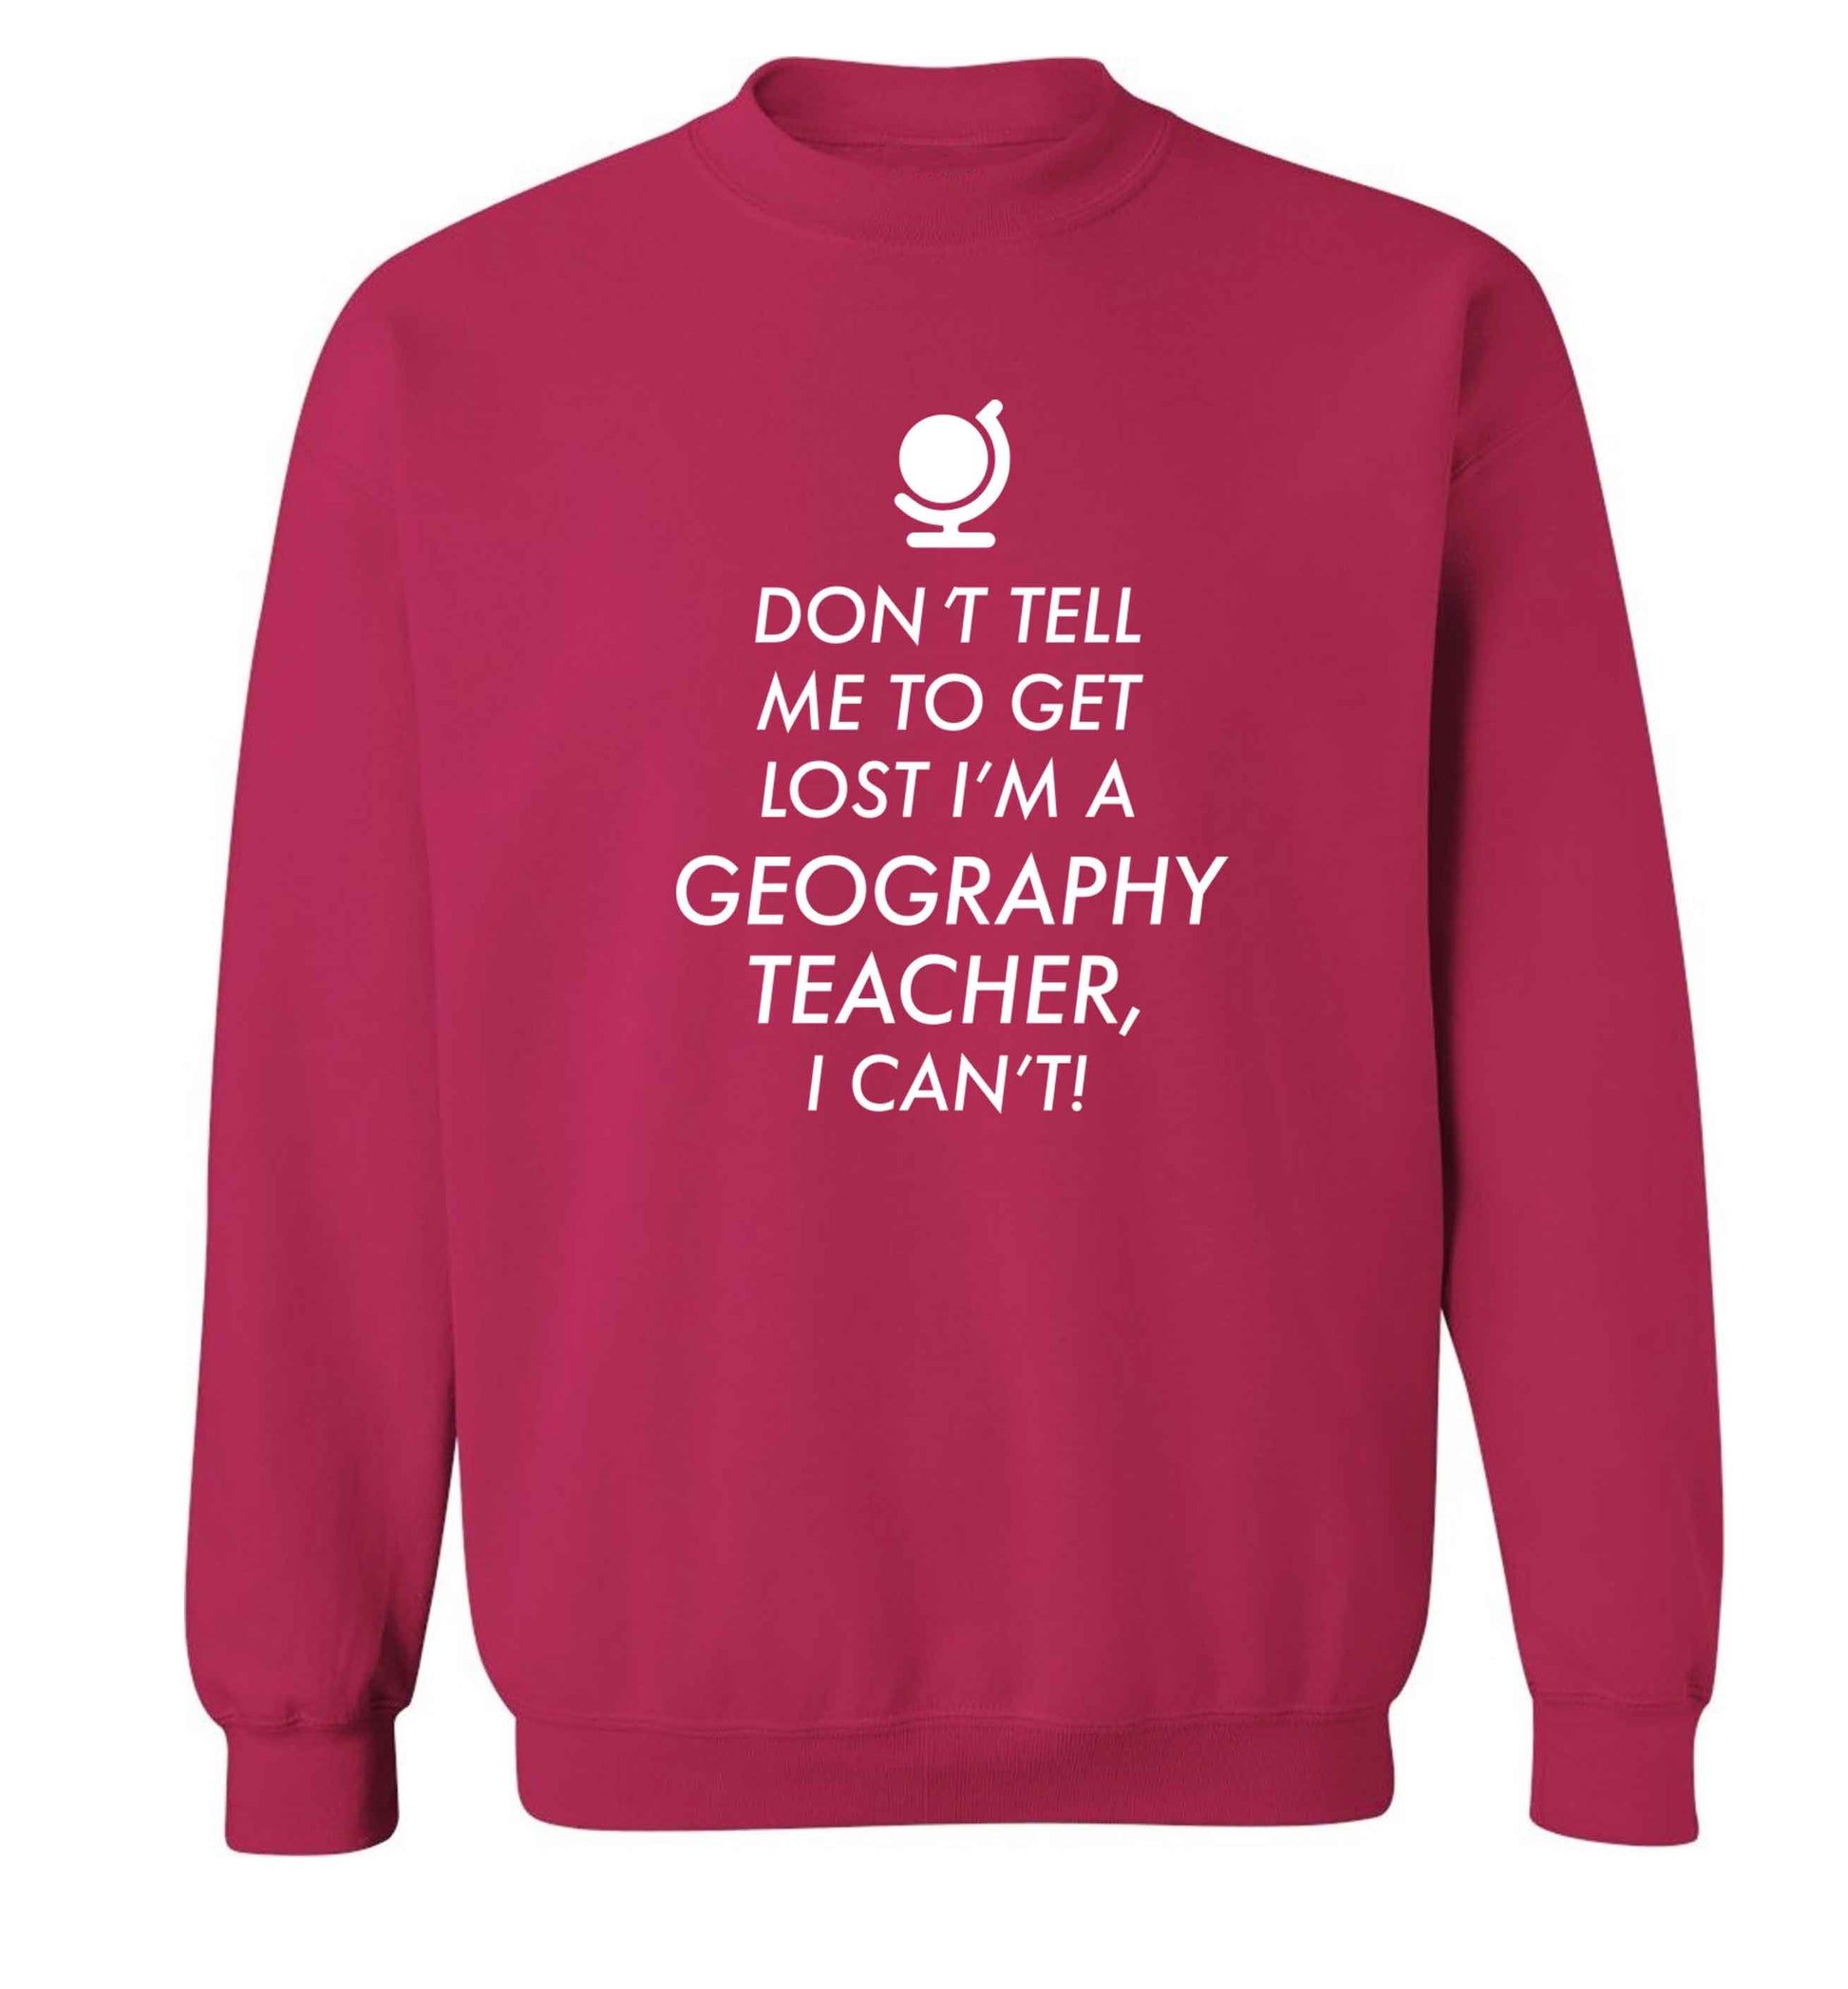 Don't tell me to get lost I'm a geography teacher, I can't Adult's unisex pink Sweater 2XL